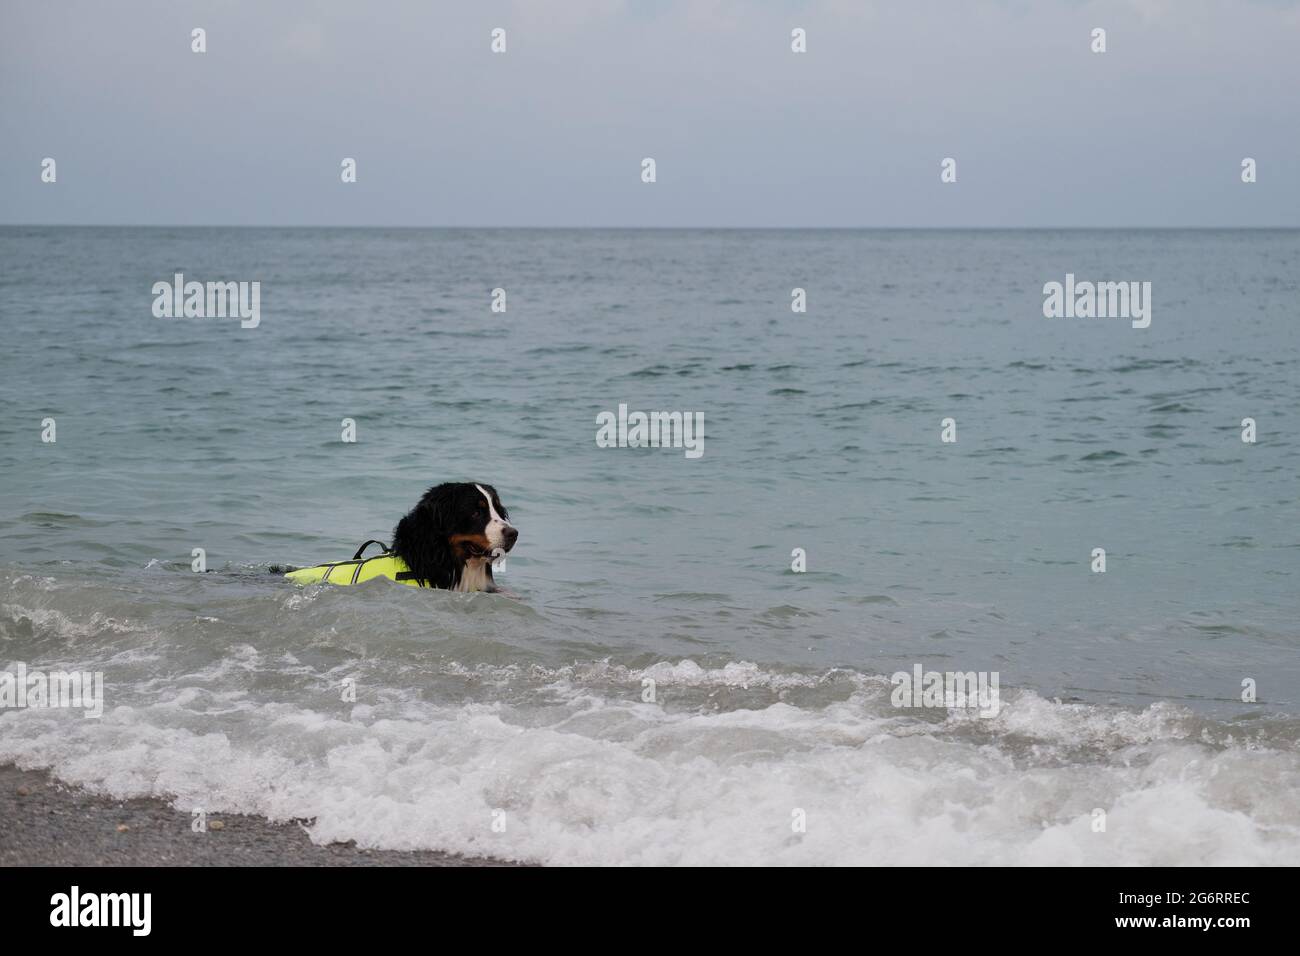 Rescue dog swims in water and enjoys quiet life without incident. Bernese mountain dog in bright green life jacket at sea. Stock Photo